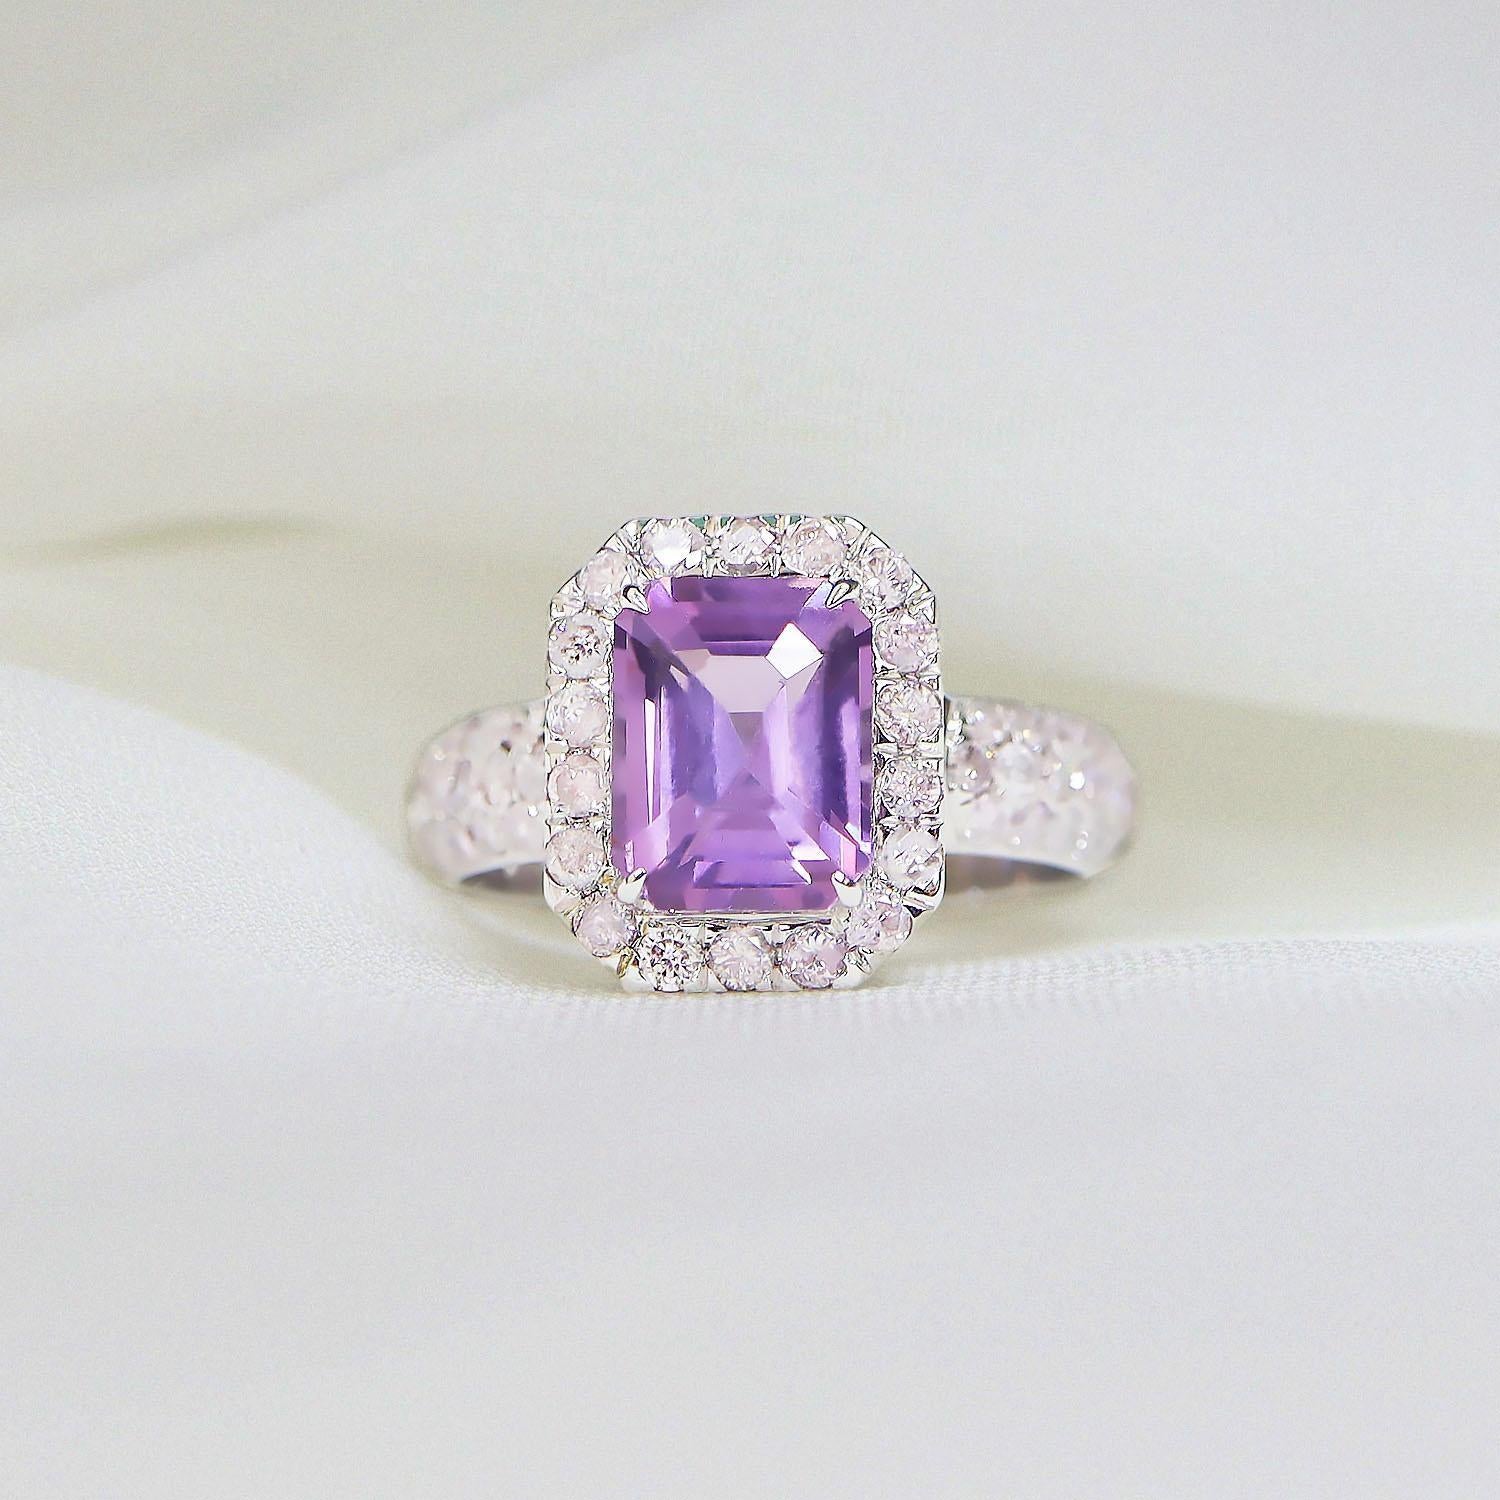 *IGI 14K 2.05 Ct Pinkish Purple Spinel&Pink Diamonds Antique Engagement Ring*

IGI-certified natural untreated pinkish-purple spinel weighing 2.05 ct set on 14K white gold luxury table pave' design band with natural pink diamonds weighing 0.77 ct. 